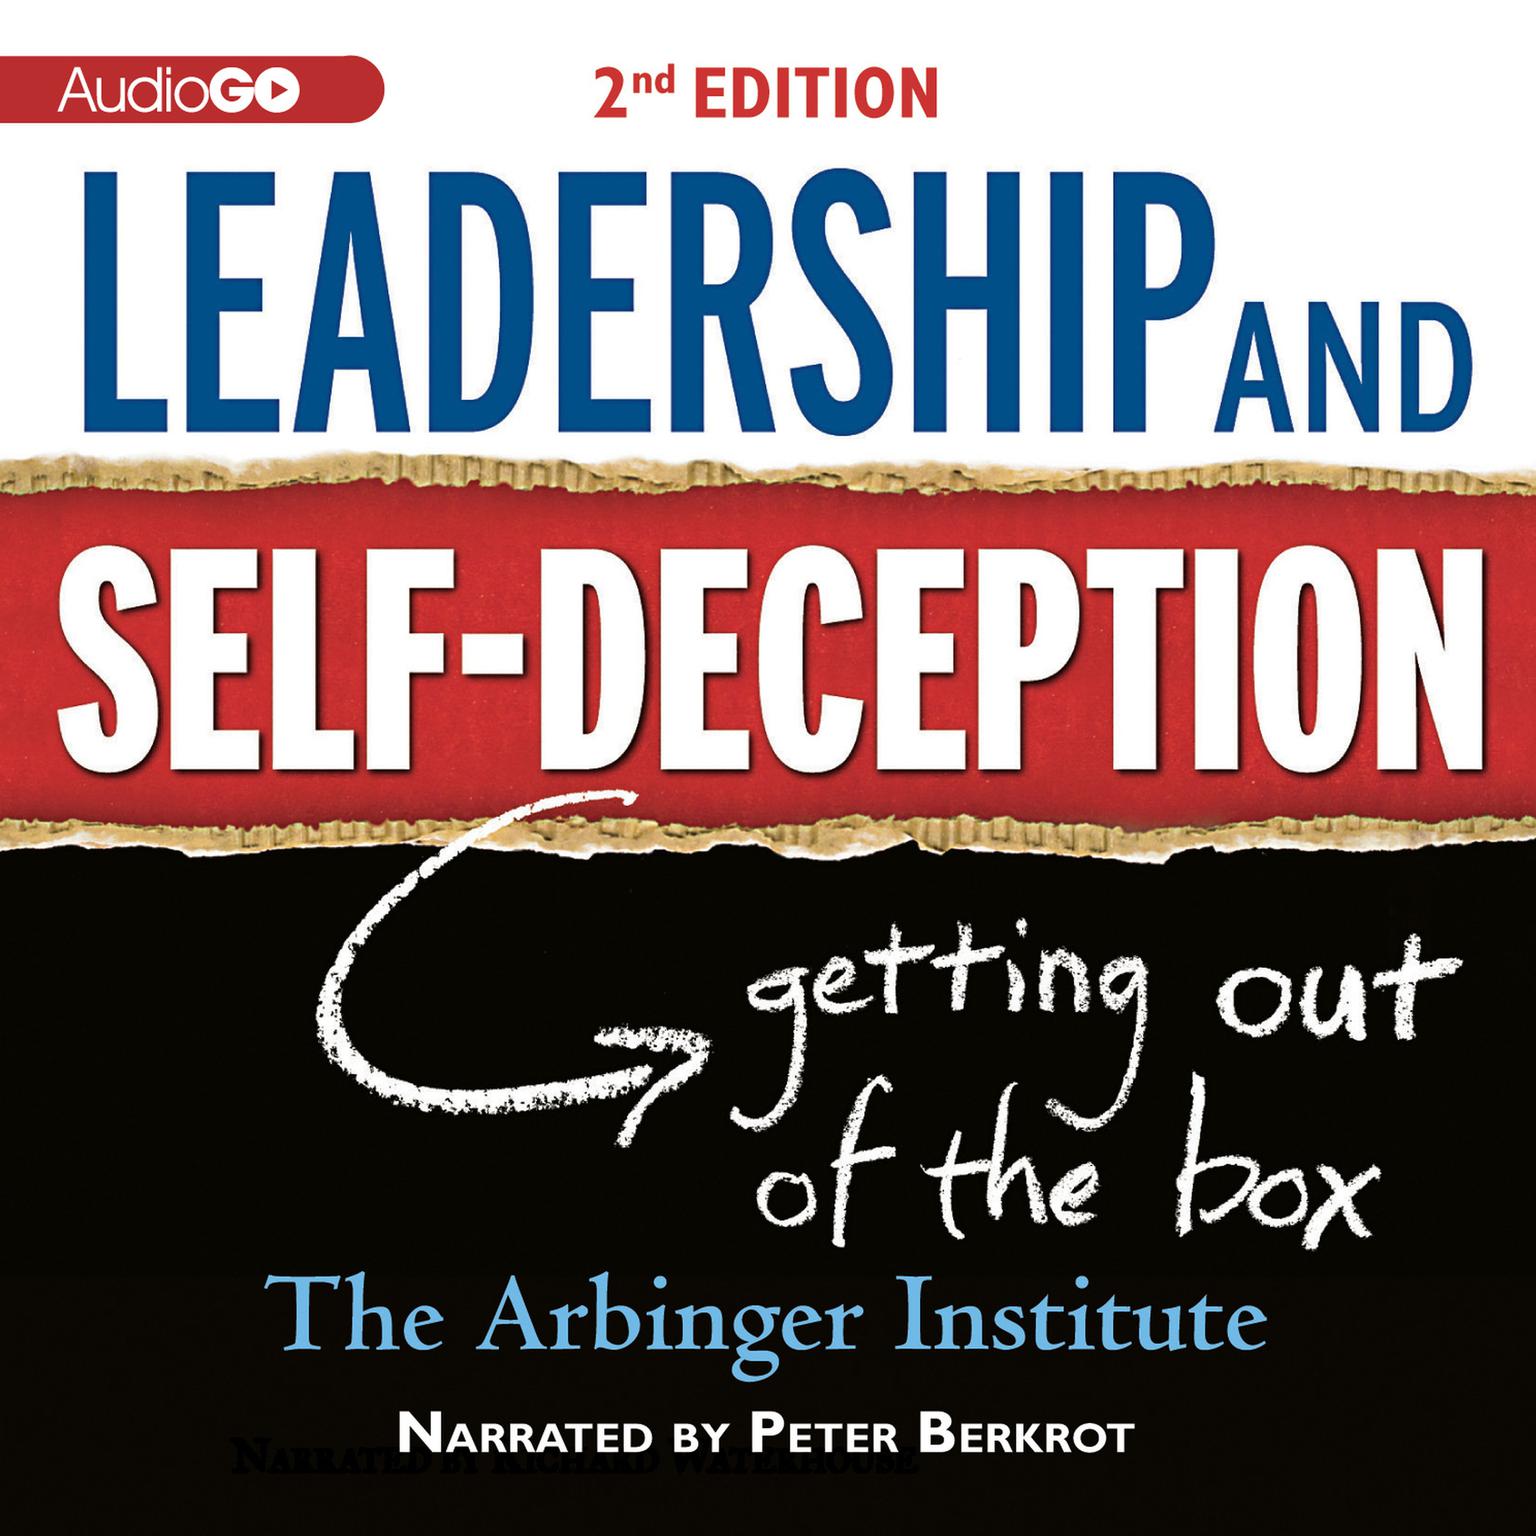 Leadership and Self-Deception, 2nd Edition: Getting Out of the Box Audiobook, by the Arbinger Institute